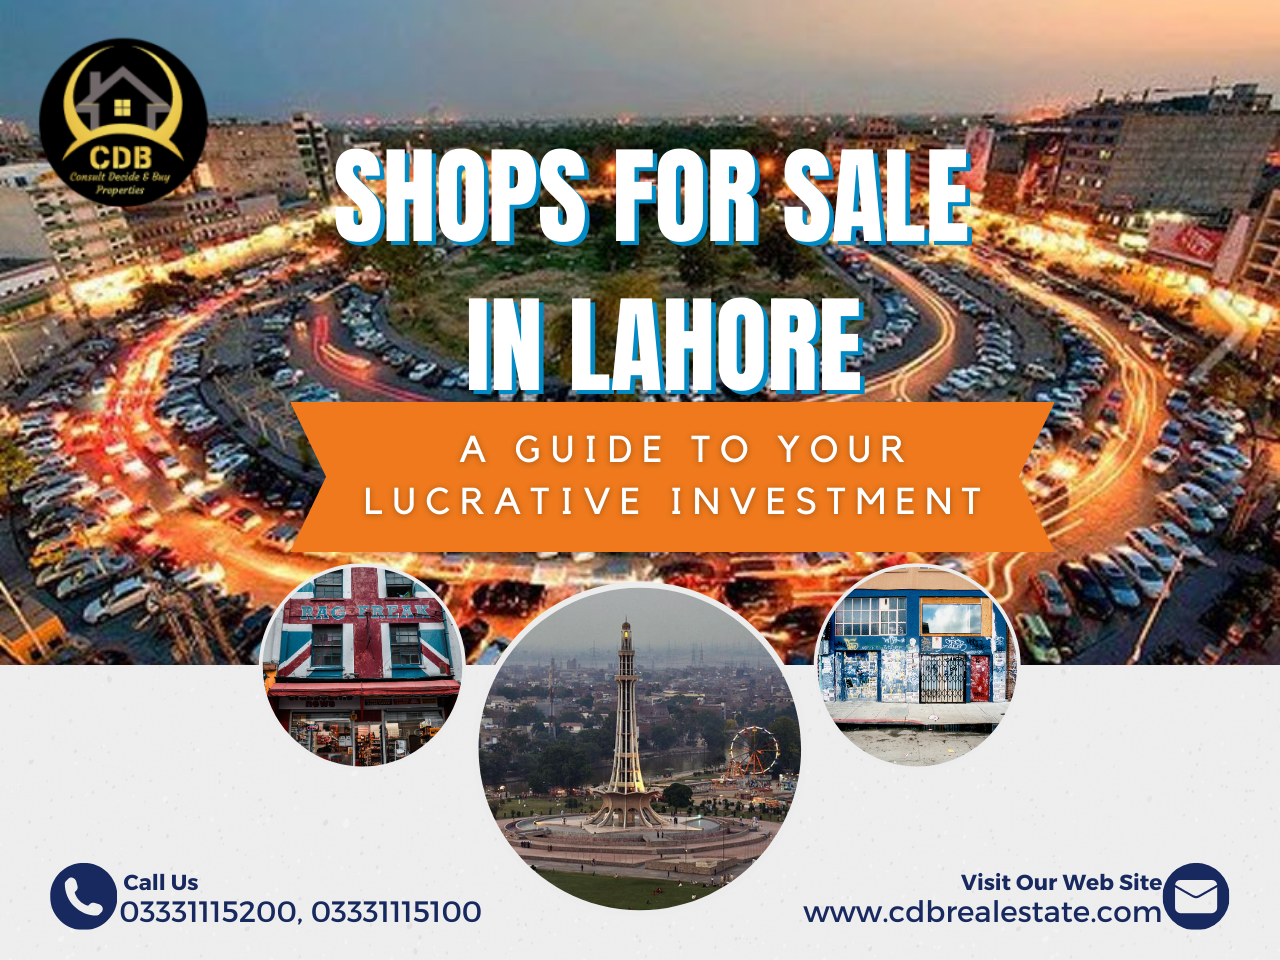 Shops for Sale in Lahore: A Guide to Your Lucrative Investment